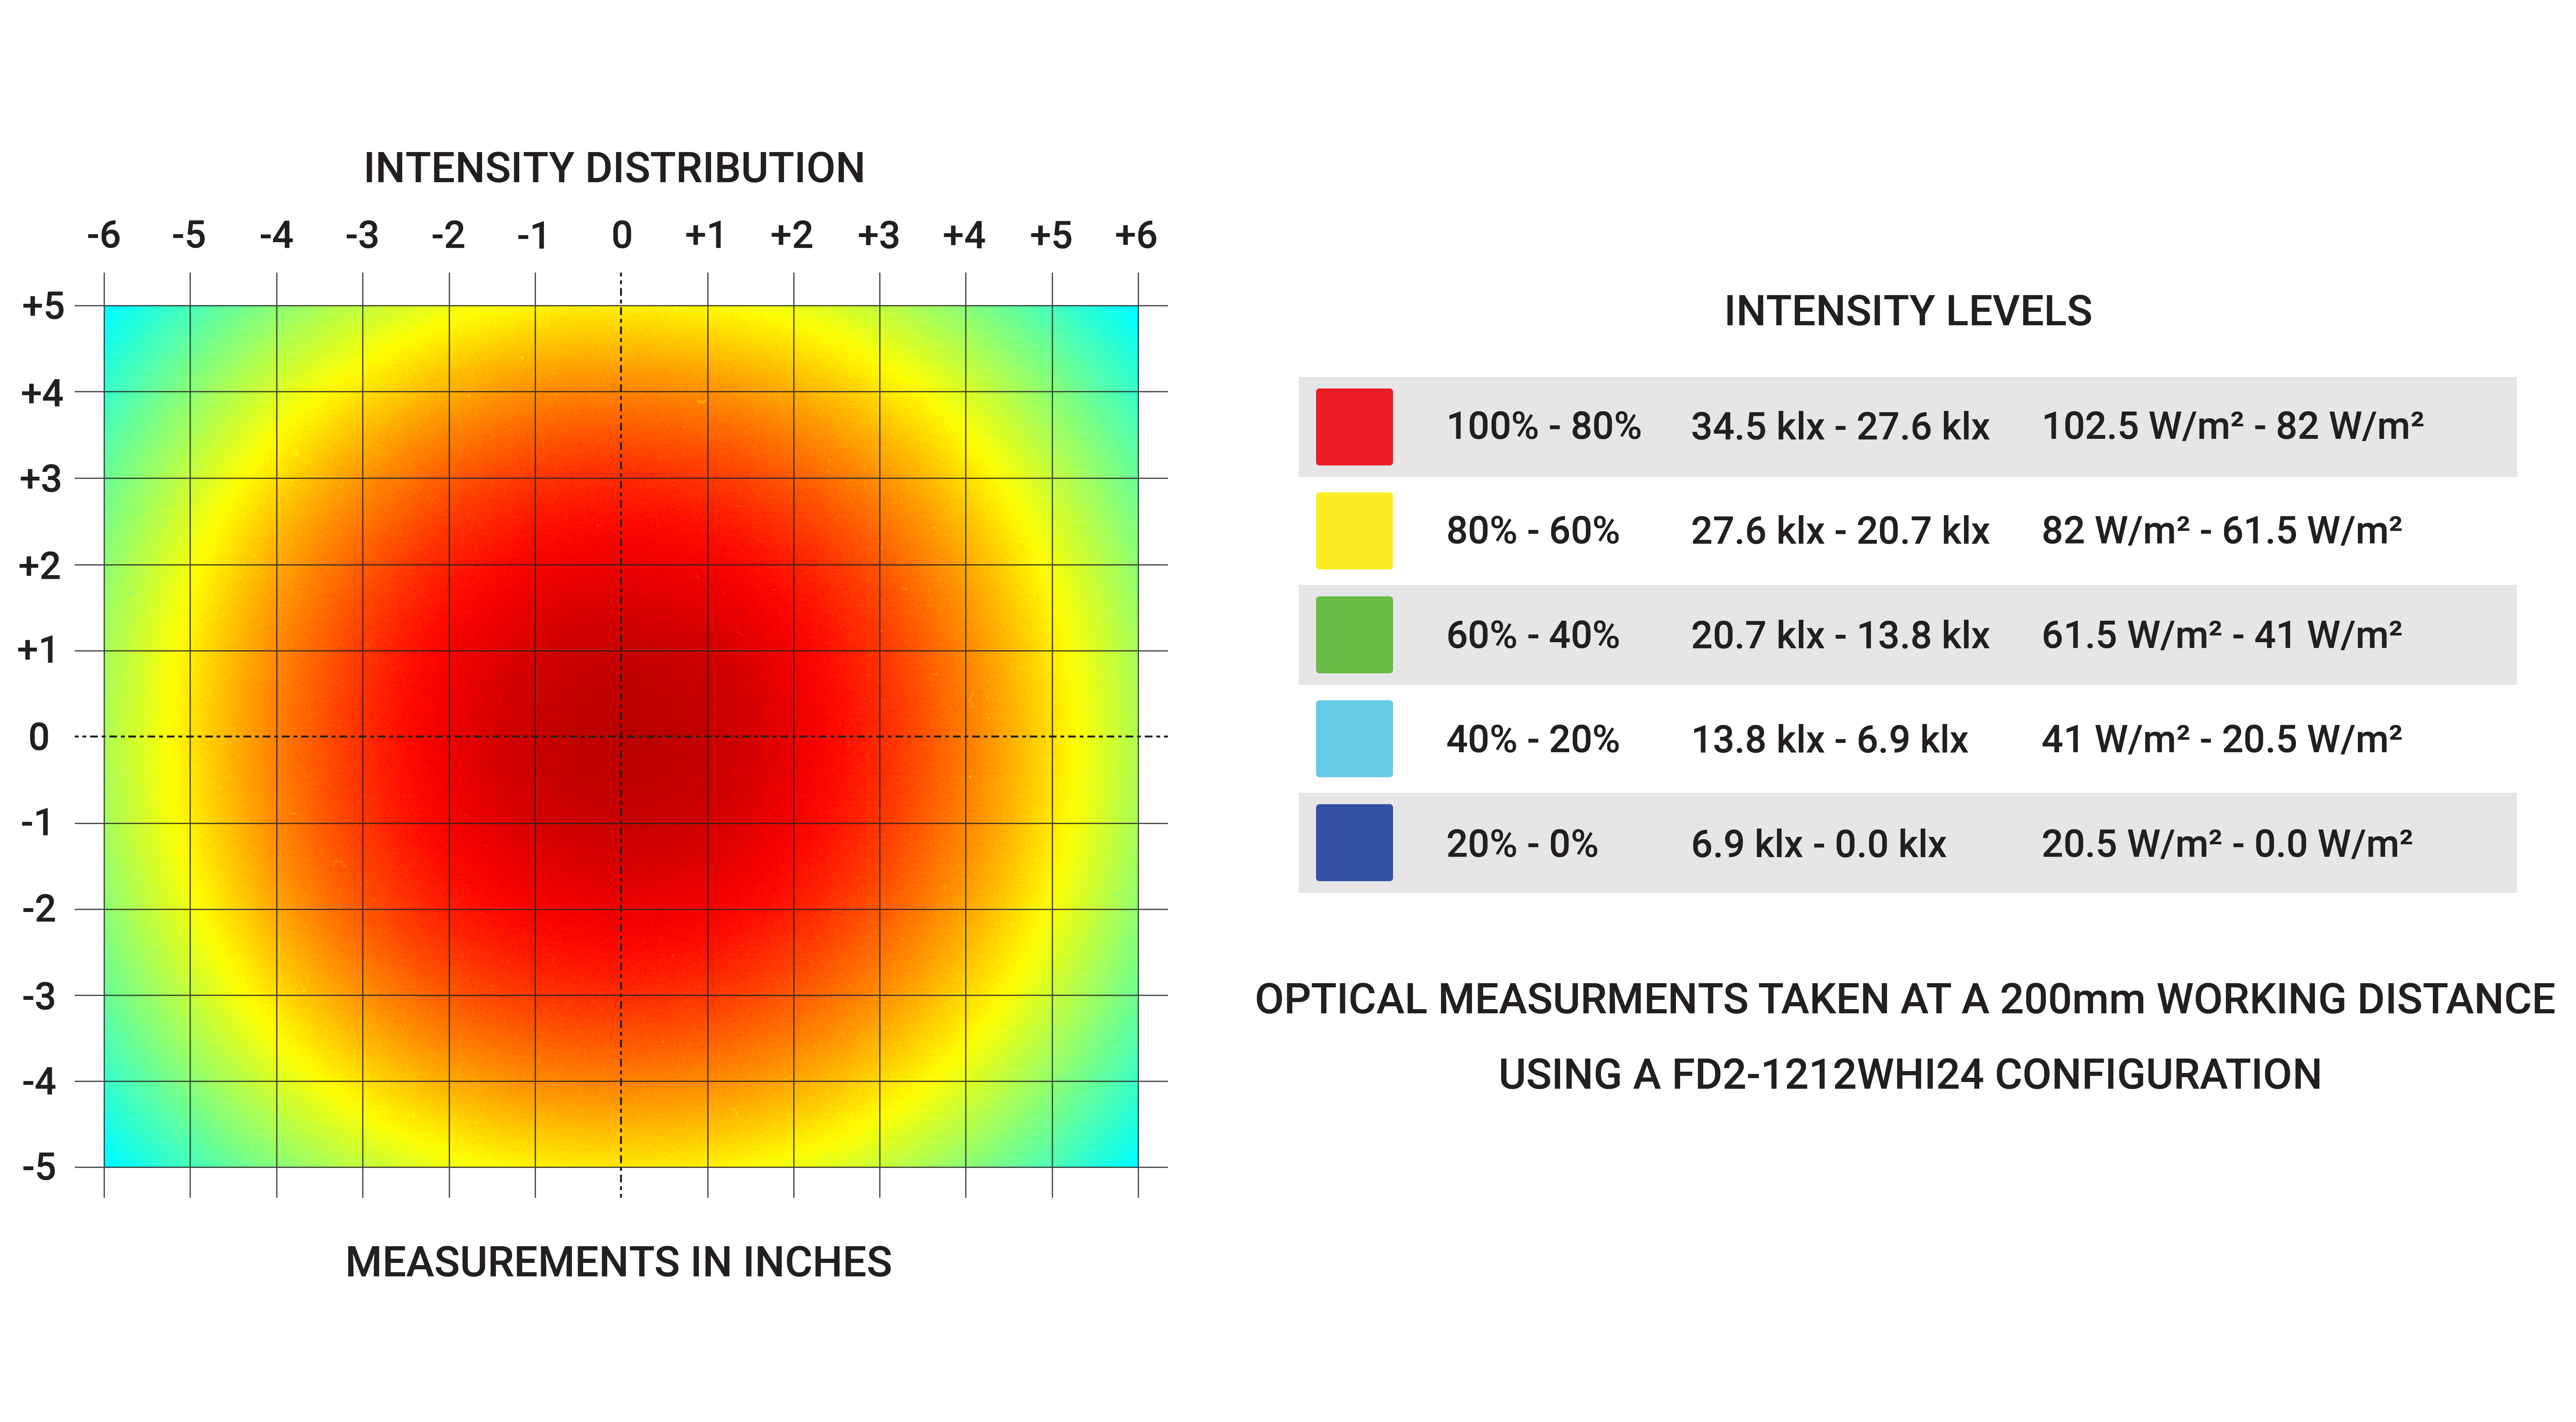 FD2-XXYY Optical Specifications